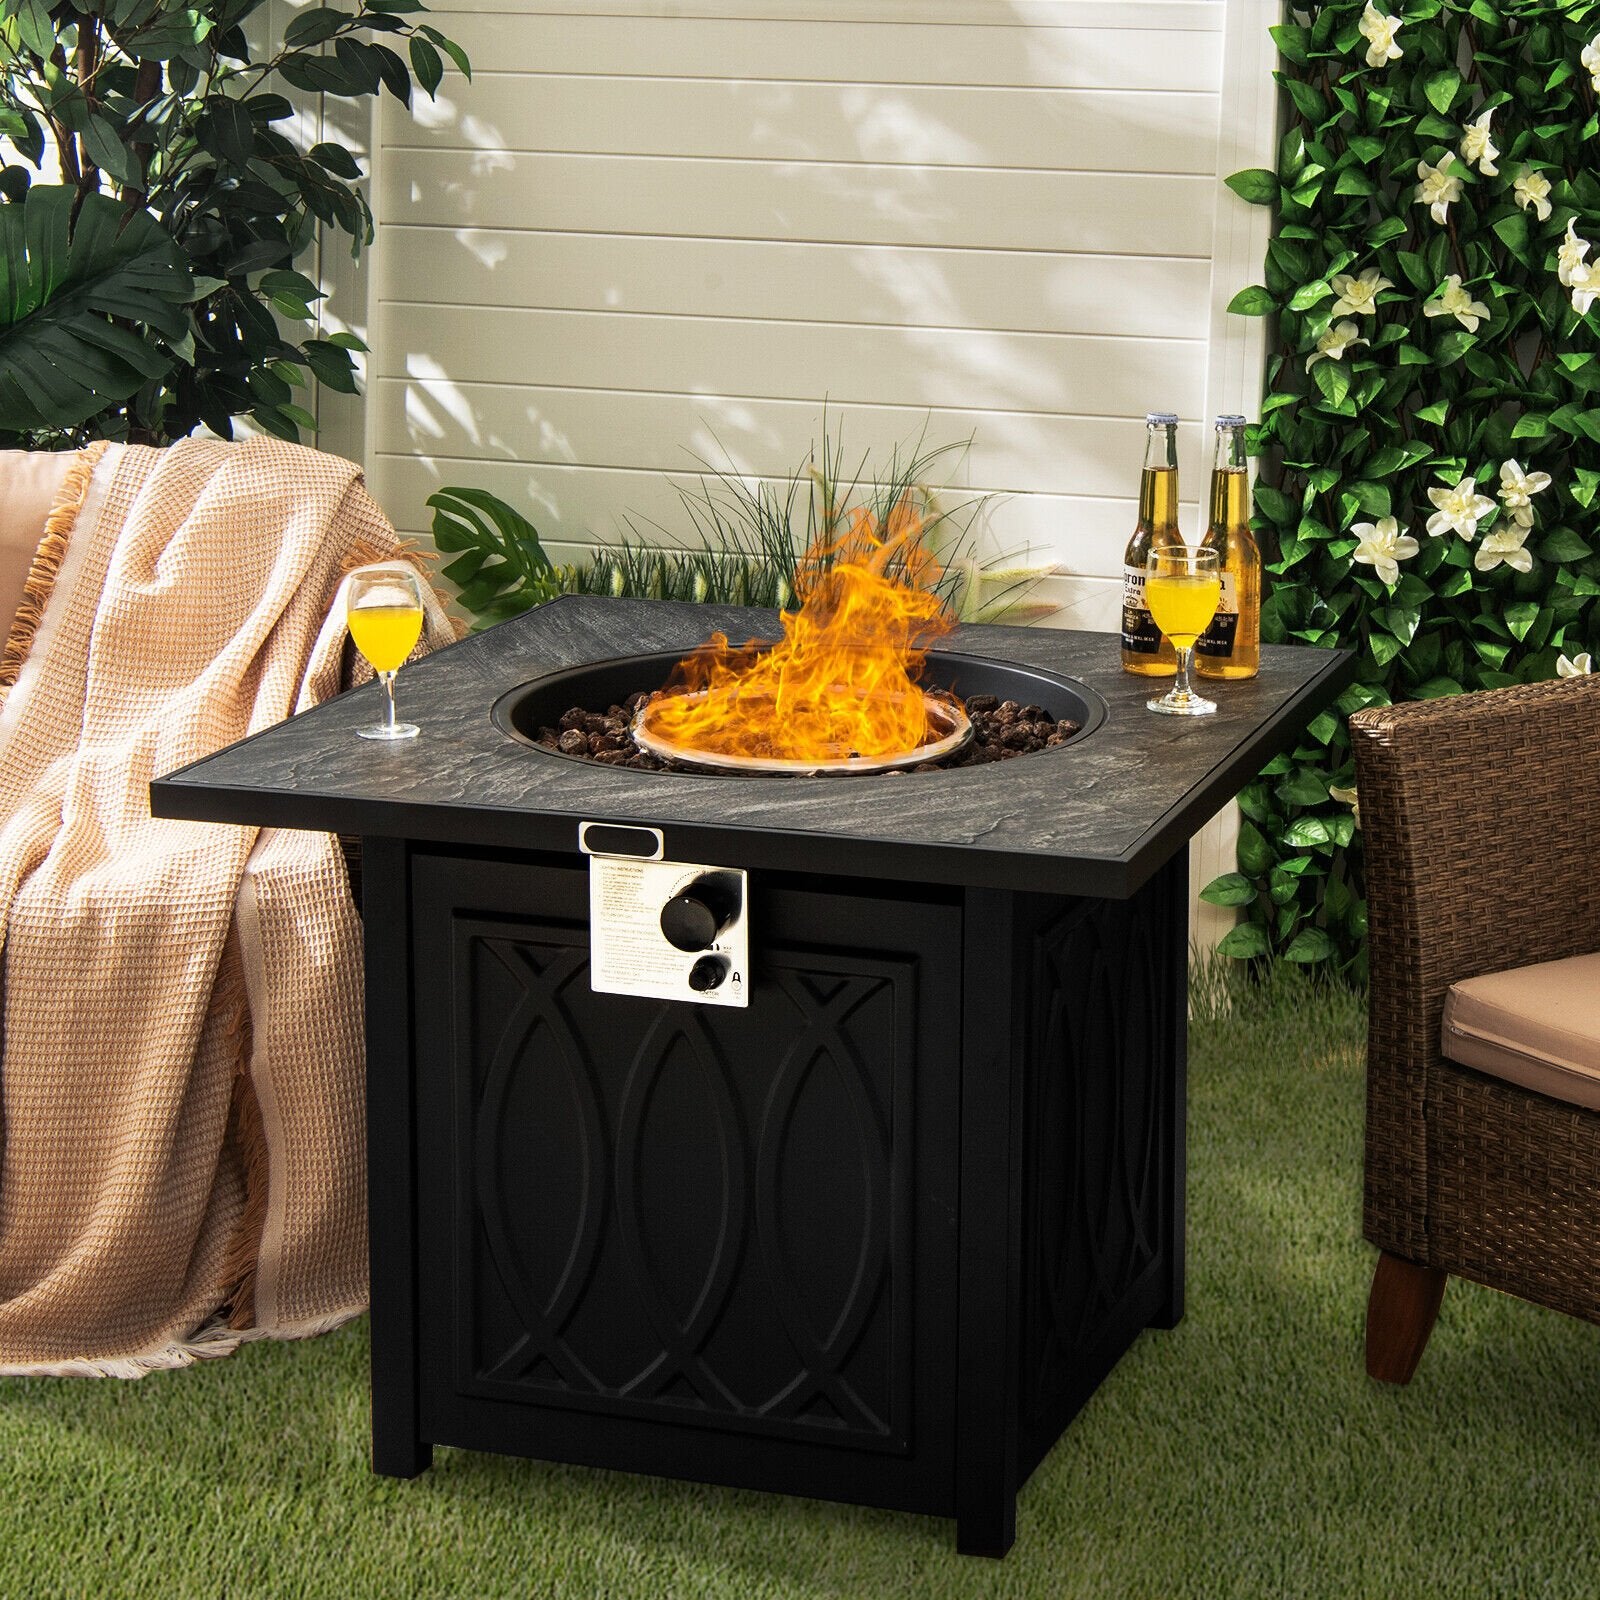 32 Inch Propane Fire Pit Table Square Tabletop with Lava Rocks Cover 50000 BTU, Black - Gallery Canada